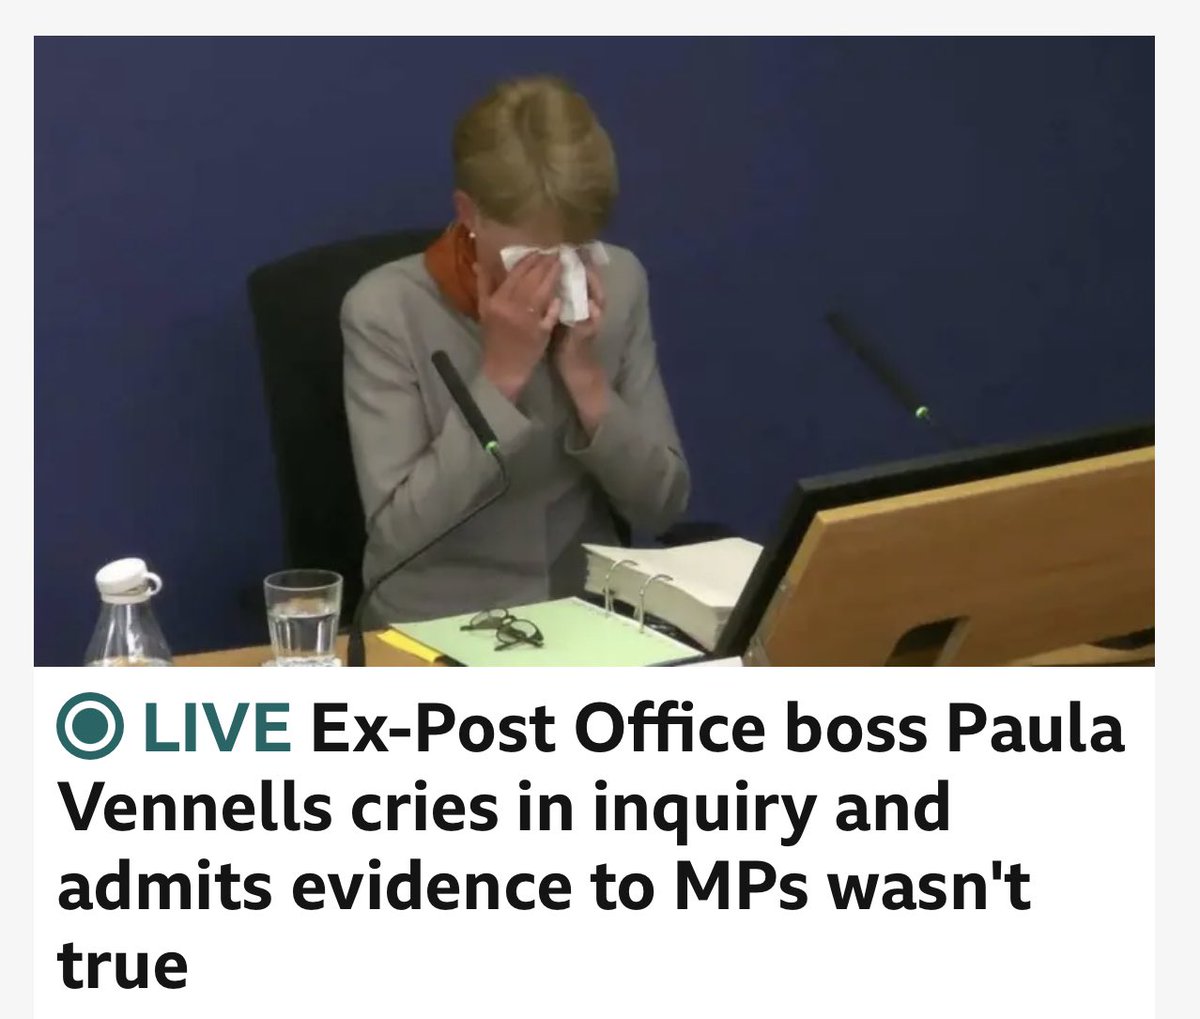 No tears when postmasters were tragically taking their own lives due to stress. No tears when postmasters were being jailed. No tears when postmasters had their whole communities turning against them. Tears now are too late. Paula Vennells must be held to account.